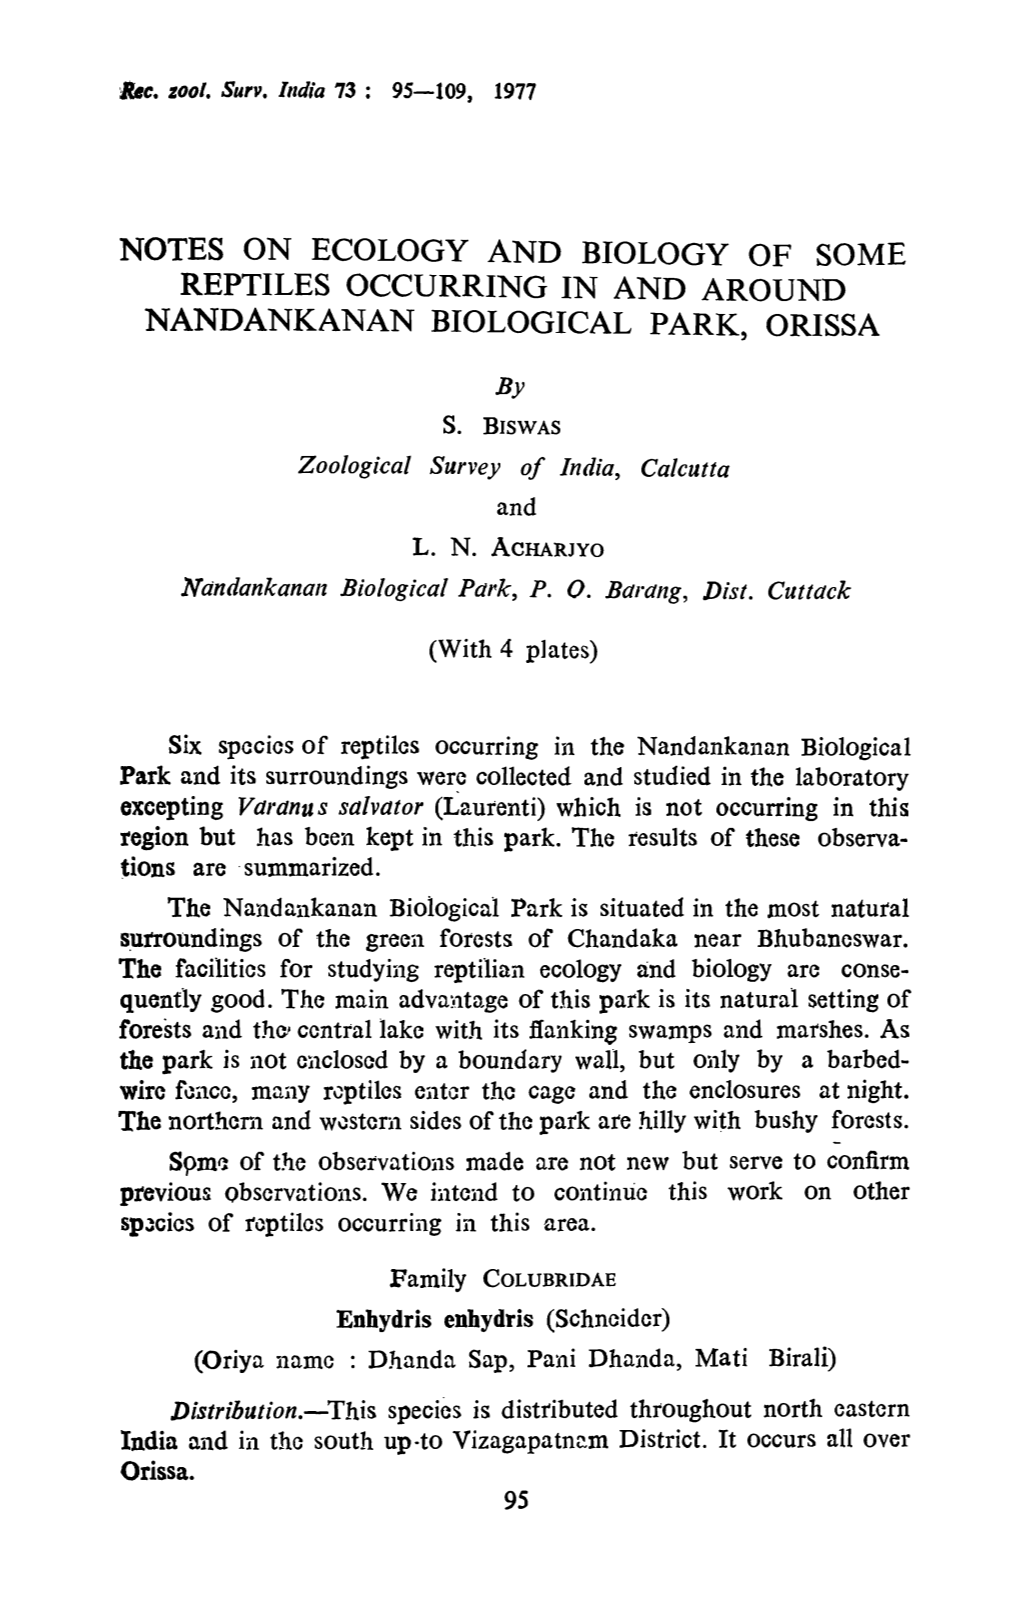 Notes on Ecology and Biology of Some Reptiles Occurring in and Around Nandankanan Biological Park, Orissa